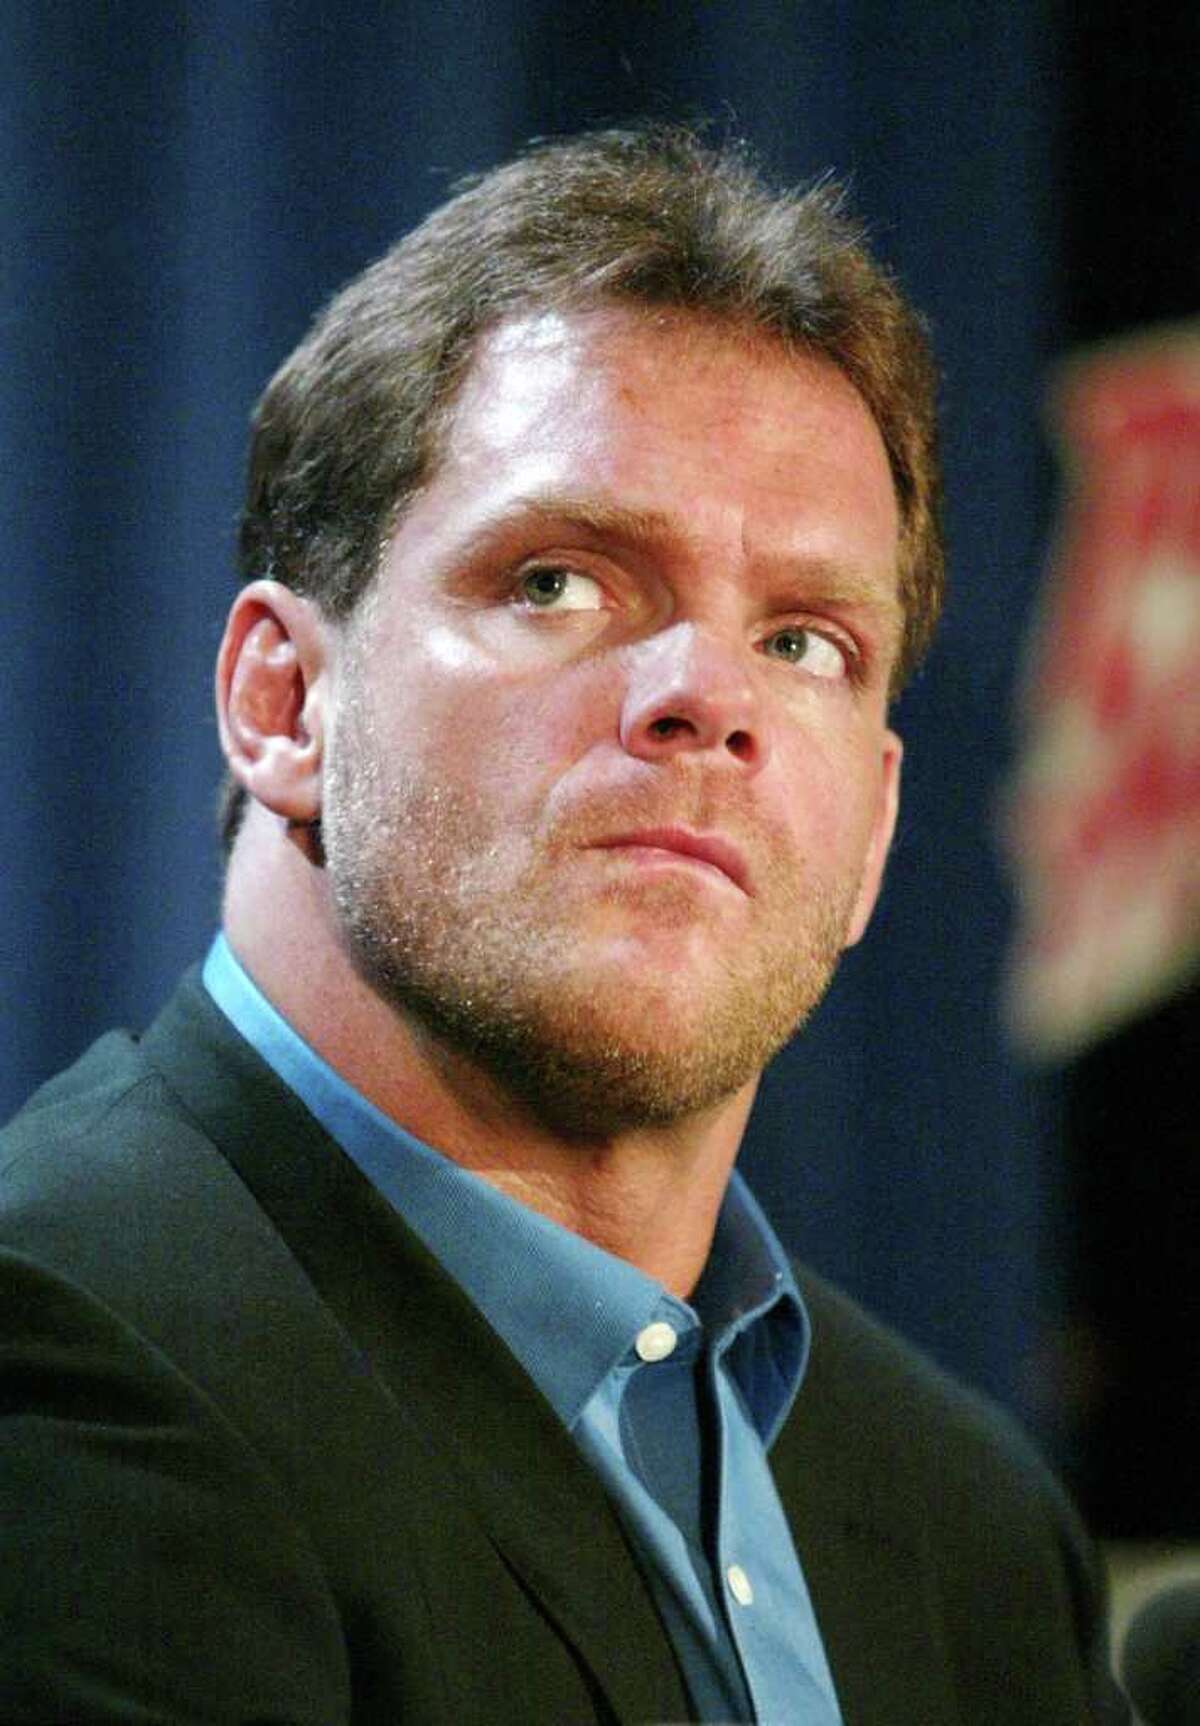 NEW YORK - MARCH 11: Wrestler Chris Benoit attends a press conference to promote Wrestlemania XX at Planet Hollywood March 11, 2004 in New York City. (Photo by Peter Kramer/Getty Images)